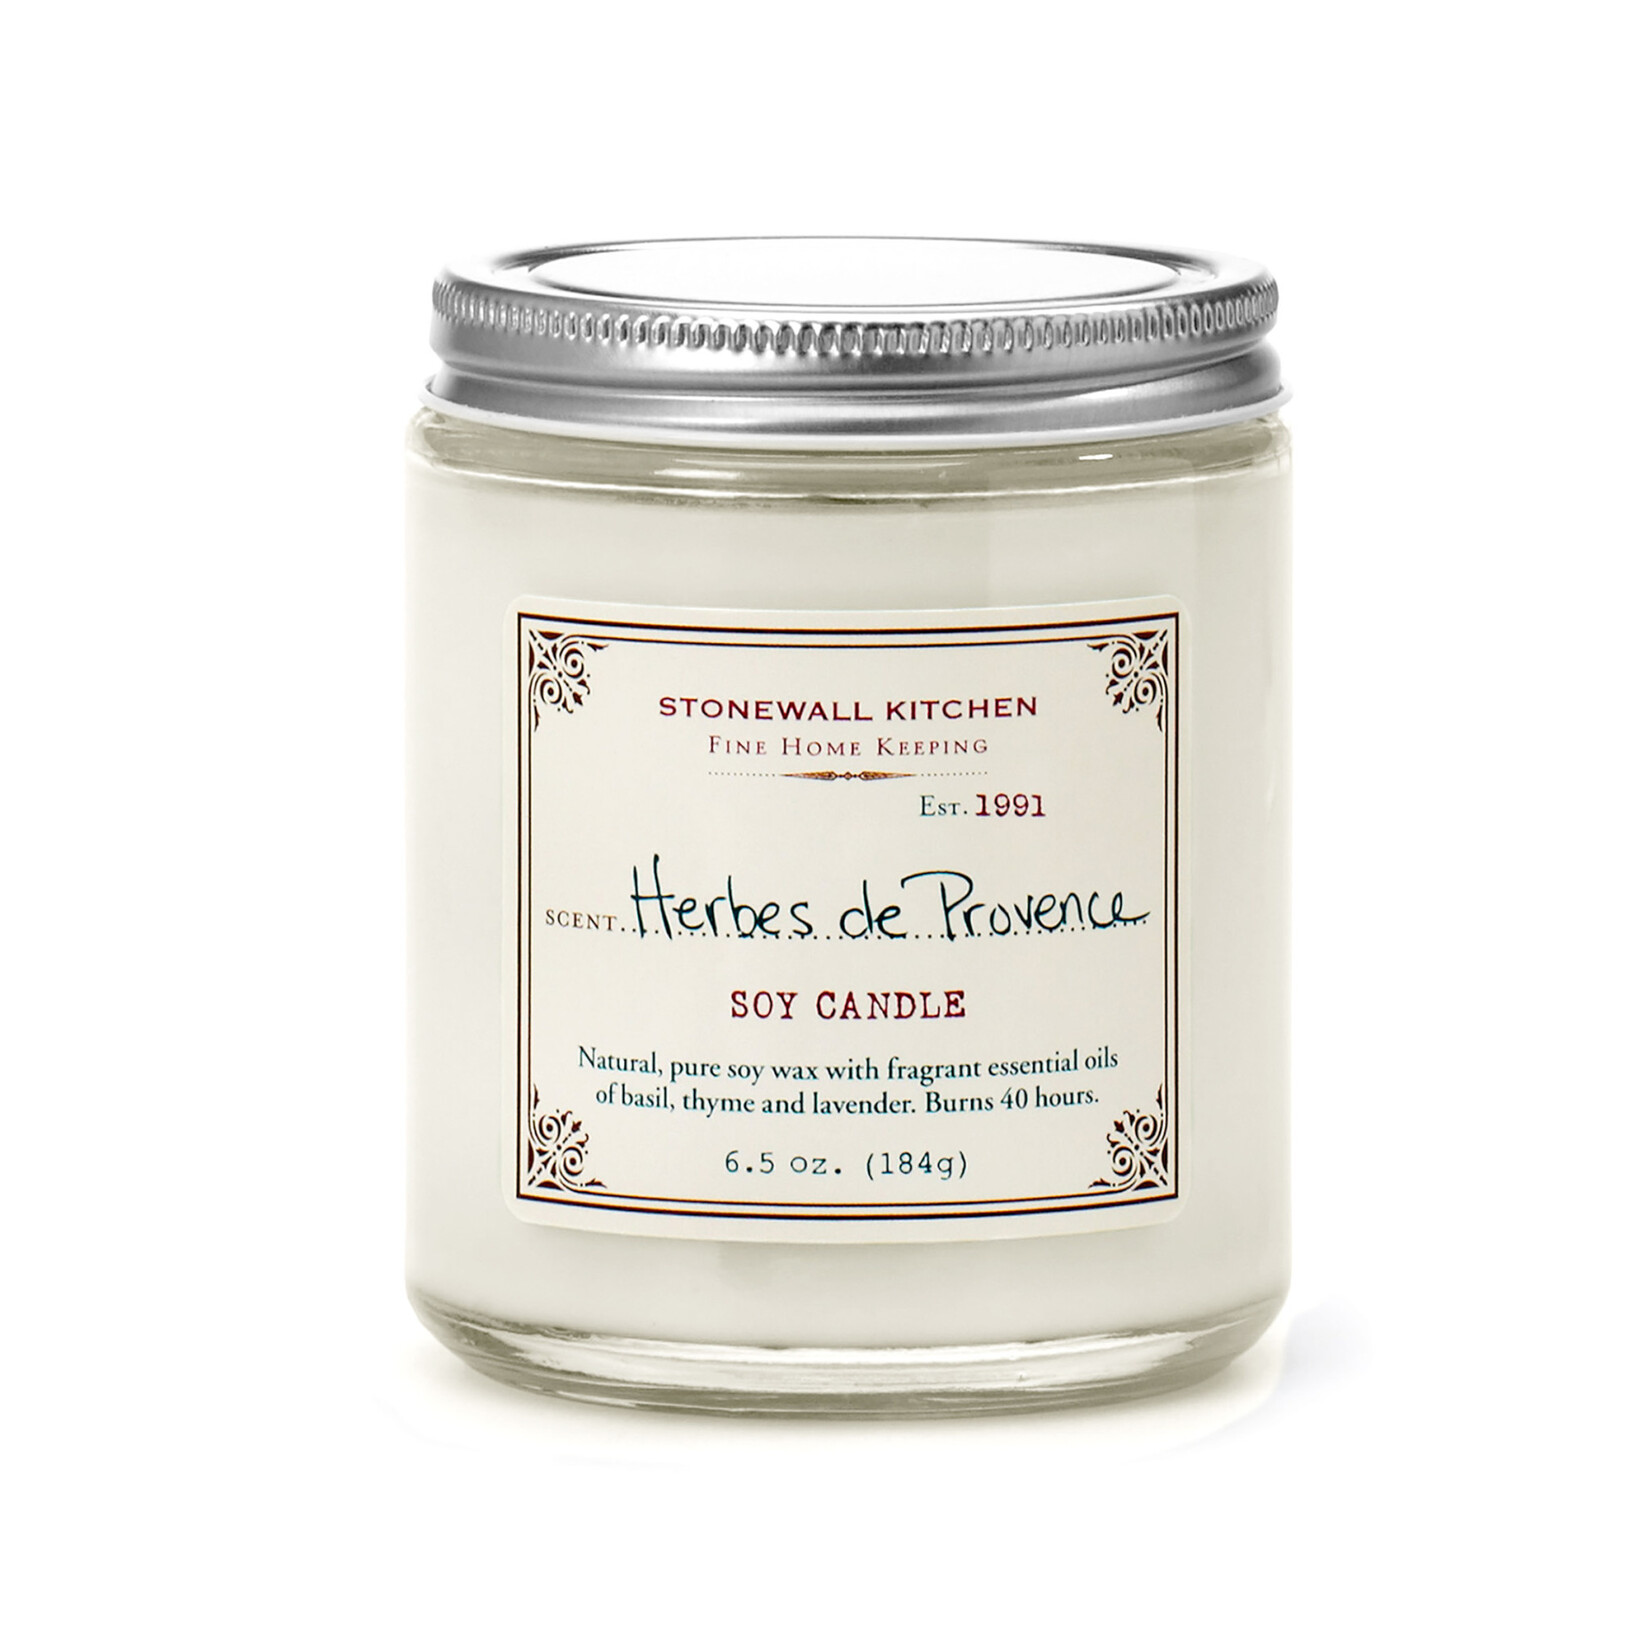 Stonewall Kitchen Herbes de Provence Candle